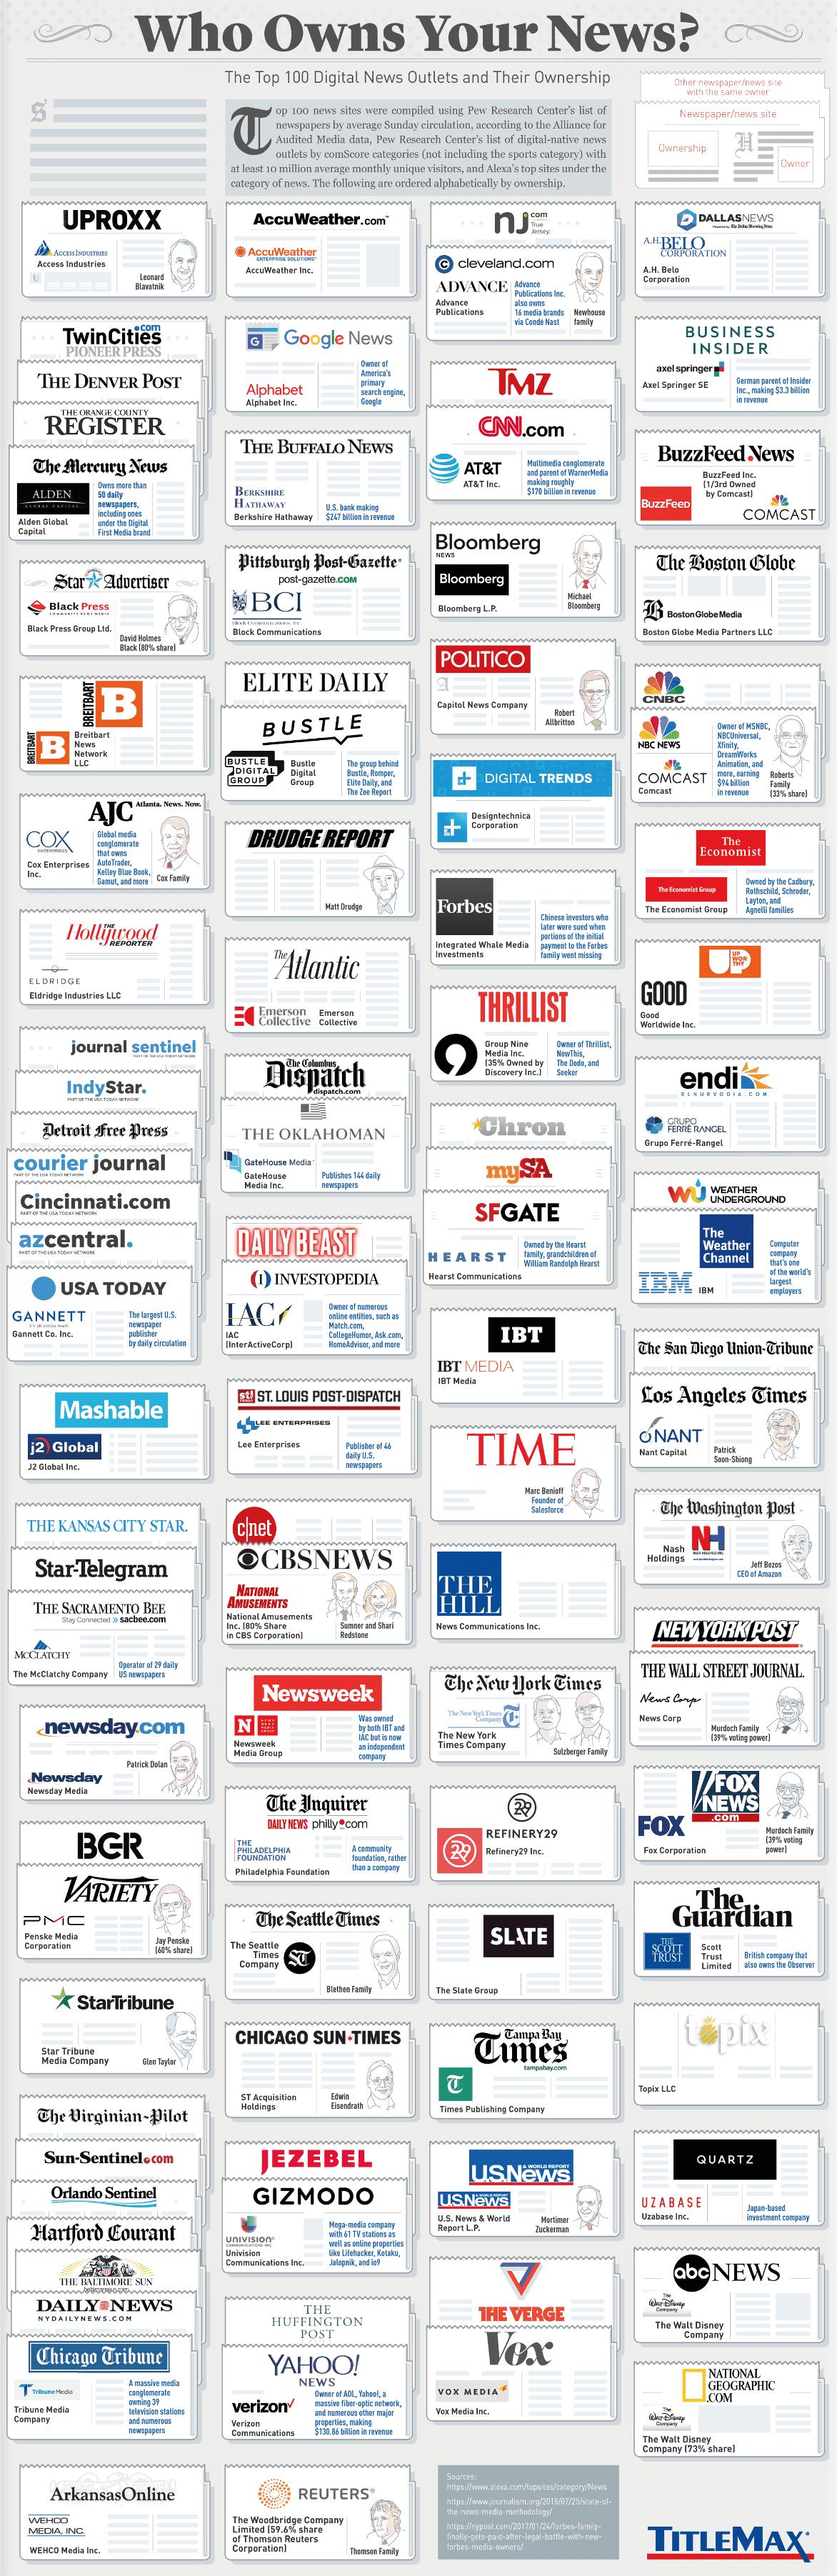 Who Owns Your News? The Top 100 Digital News Outlets and Their Ownership #infographic